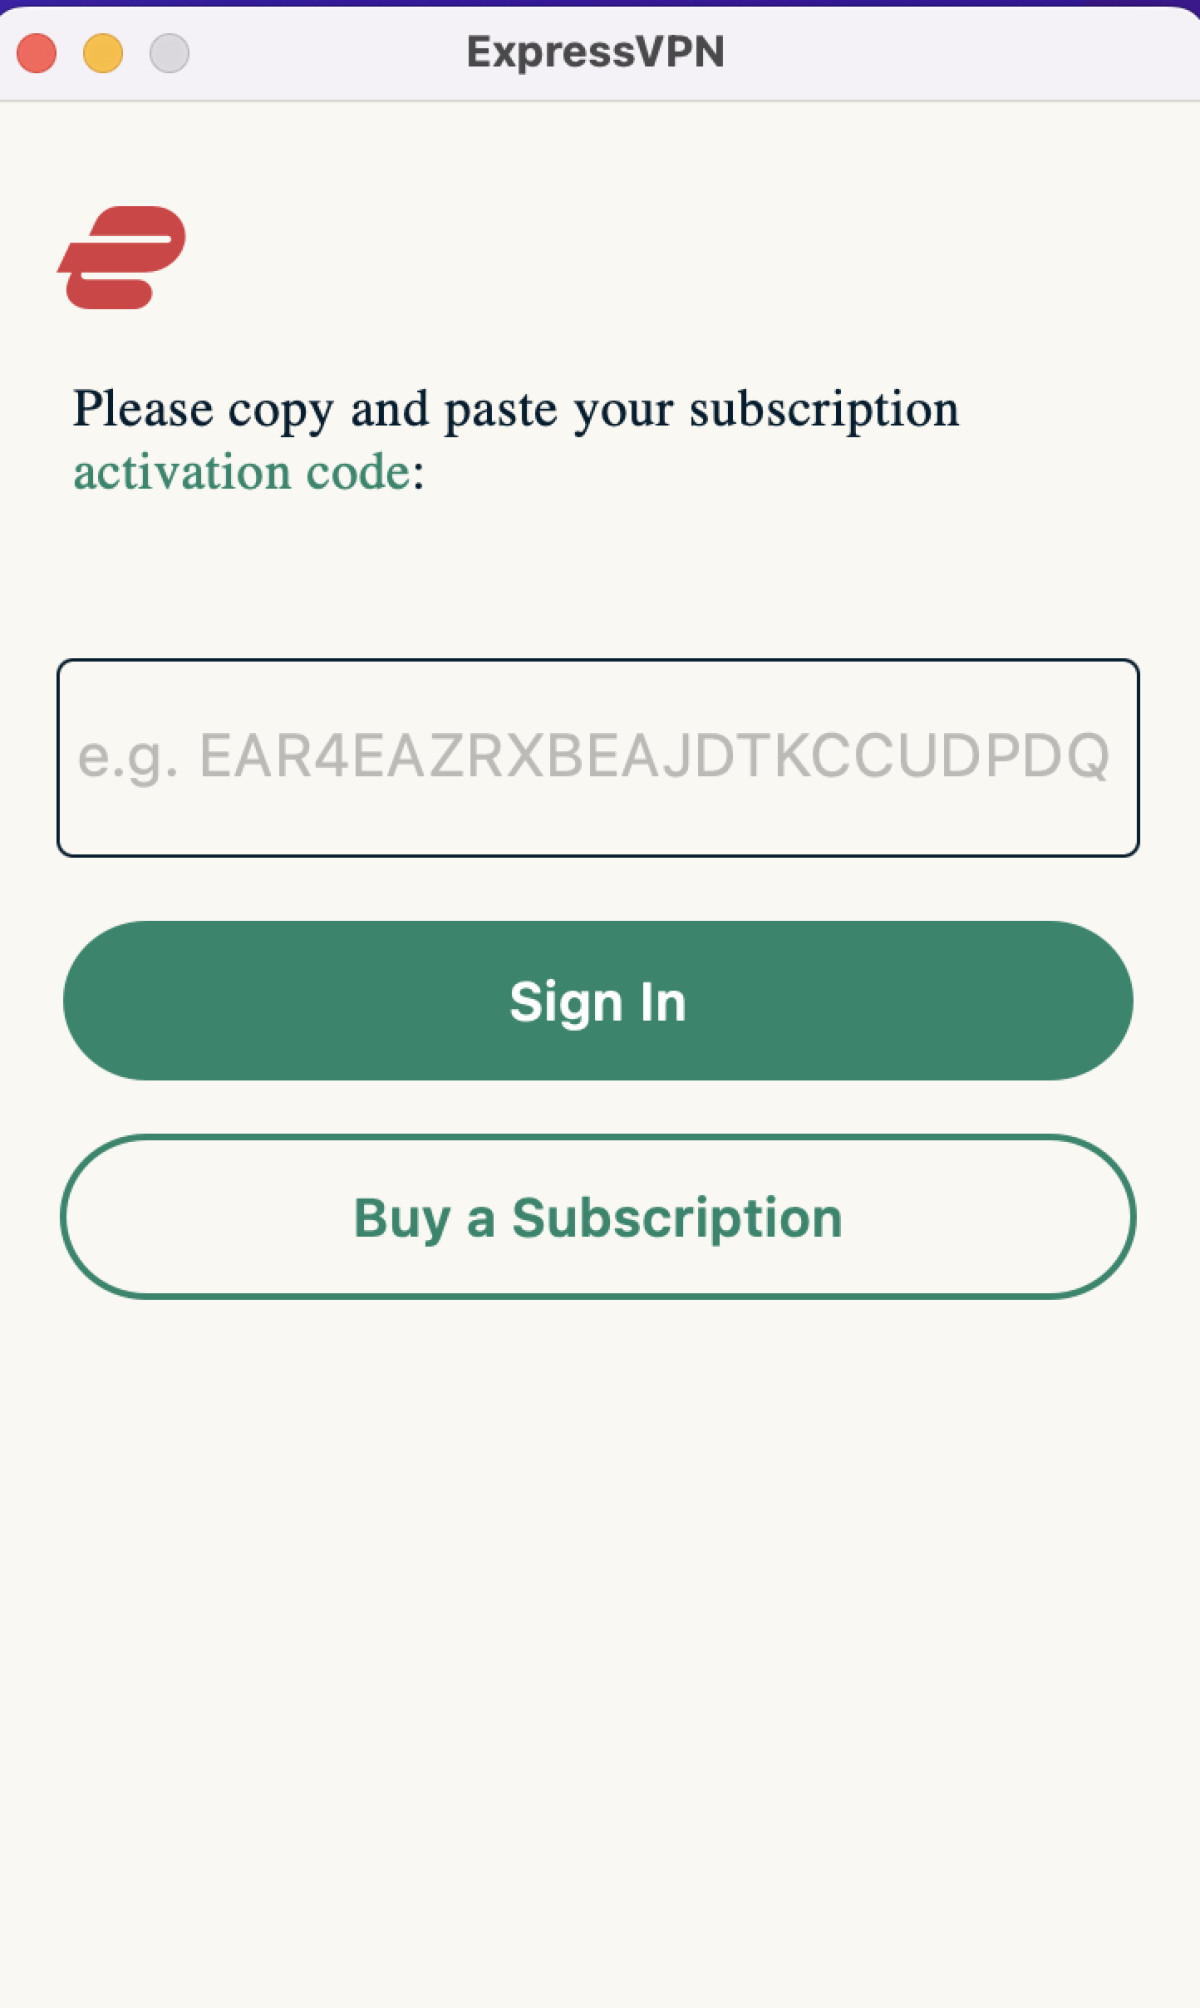 Open the app and click on Sign In. Copy and paste your subscription activation code which you received after you purchased the subscription.